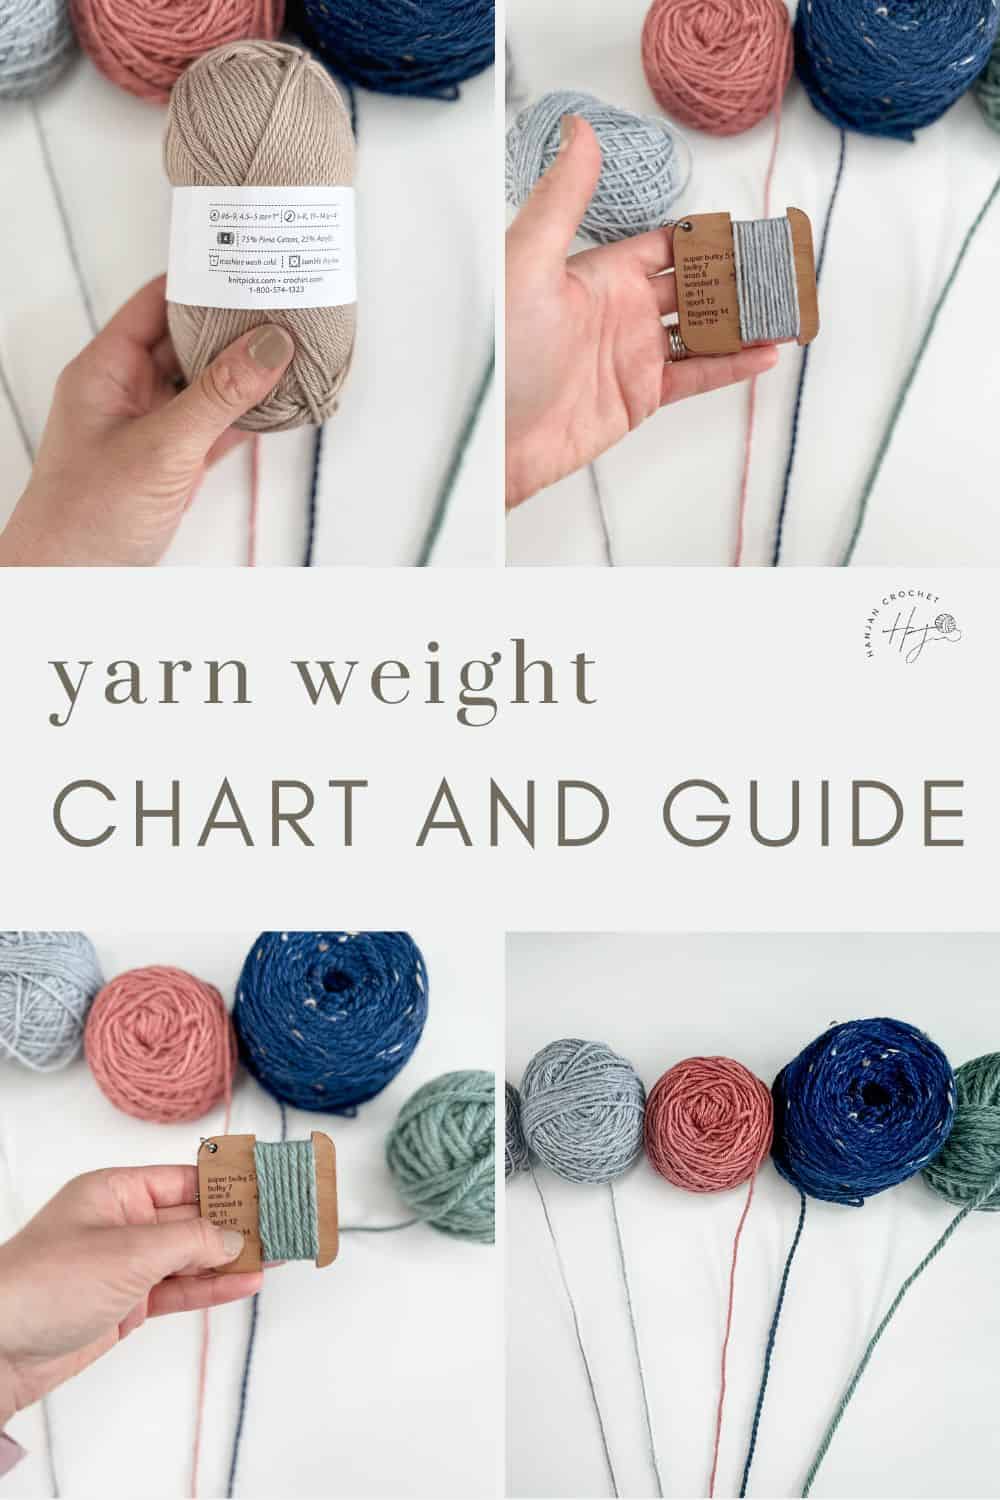 Collage showing different yarn weights. Top left: hand holding beige yarn. Top right: hand holding gray yarn sample with yarn balls in background. Bottom left: hand holding green yarn sample. Bottom right: various yarn balls. Text: "Comprehensive Yarn Weight Chart Guide.